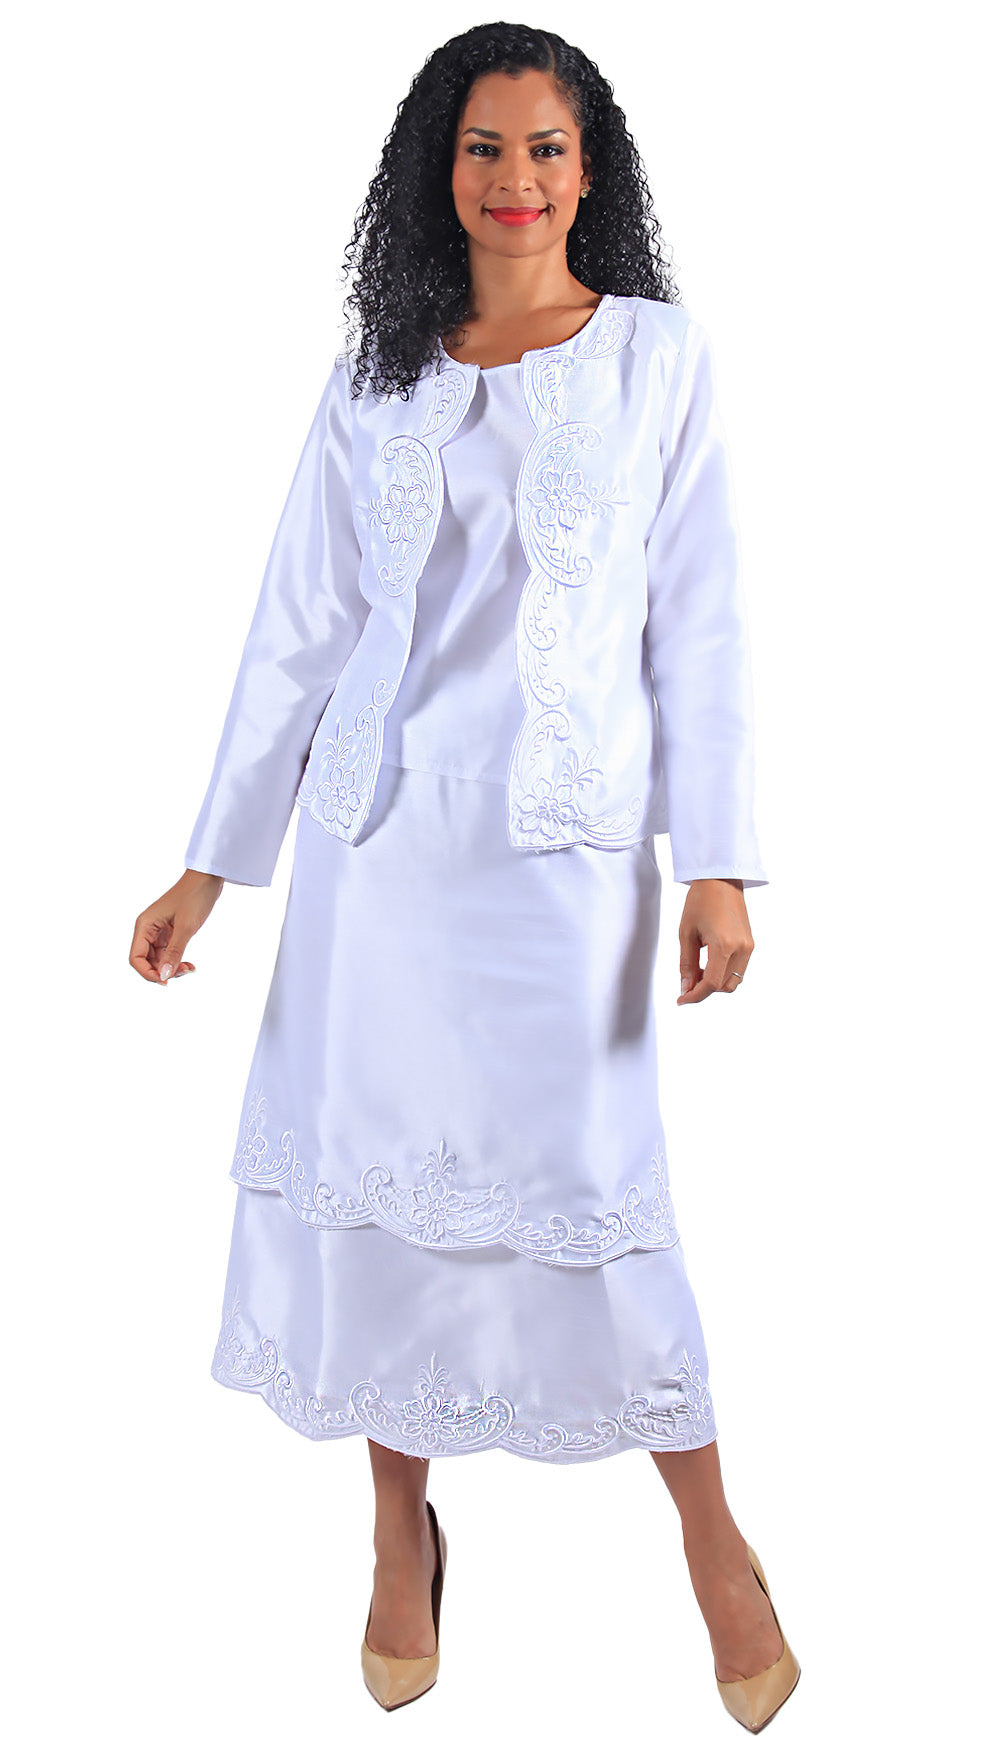 Diana Couture Church Suit 8645C-White - Church Suits For Less